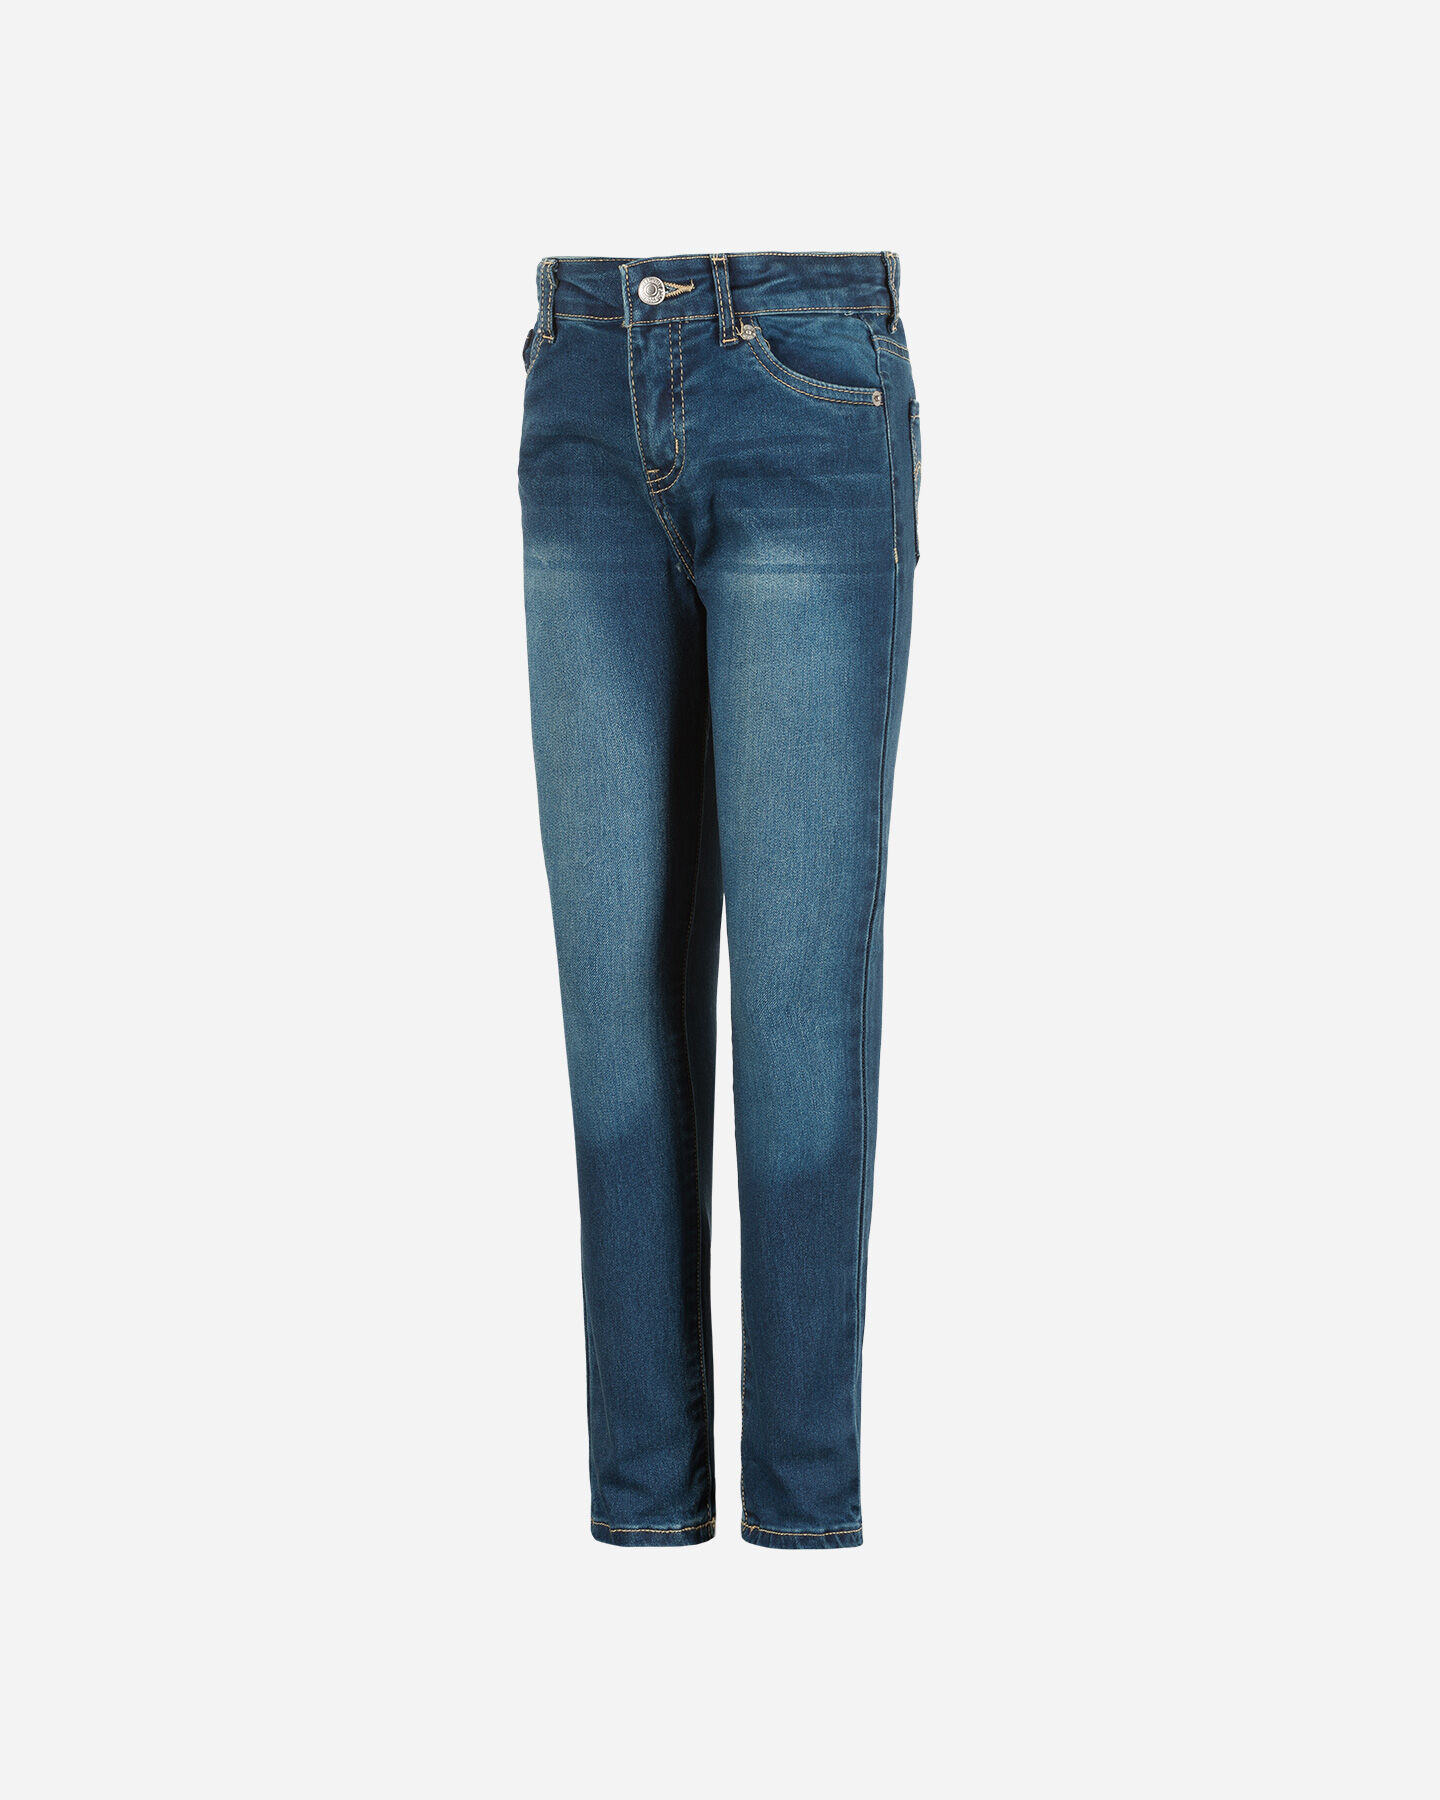  Jeans LEVI'S 711 SKINNY JR S4076442|MAM|6A scatto 0